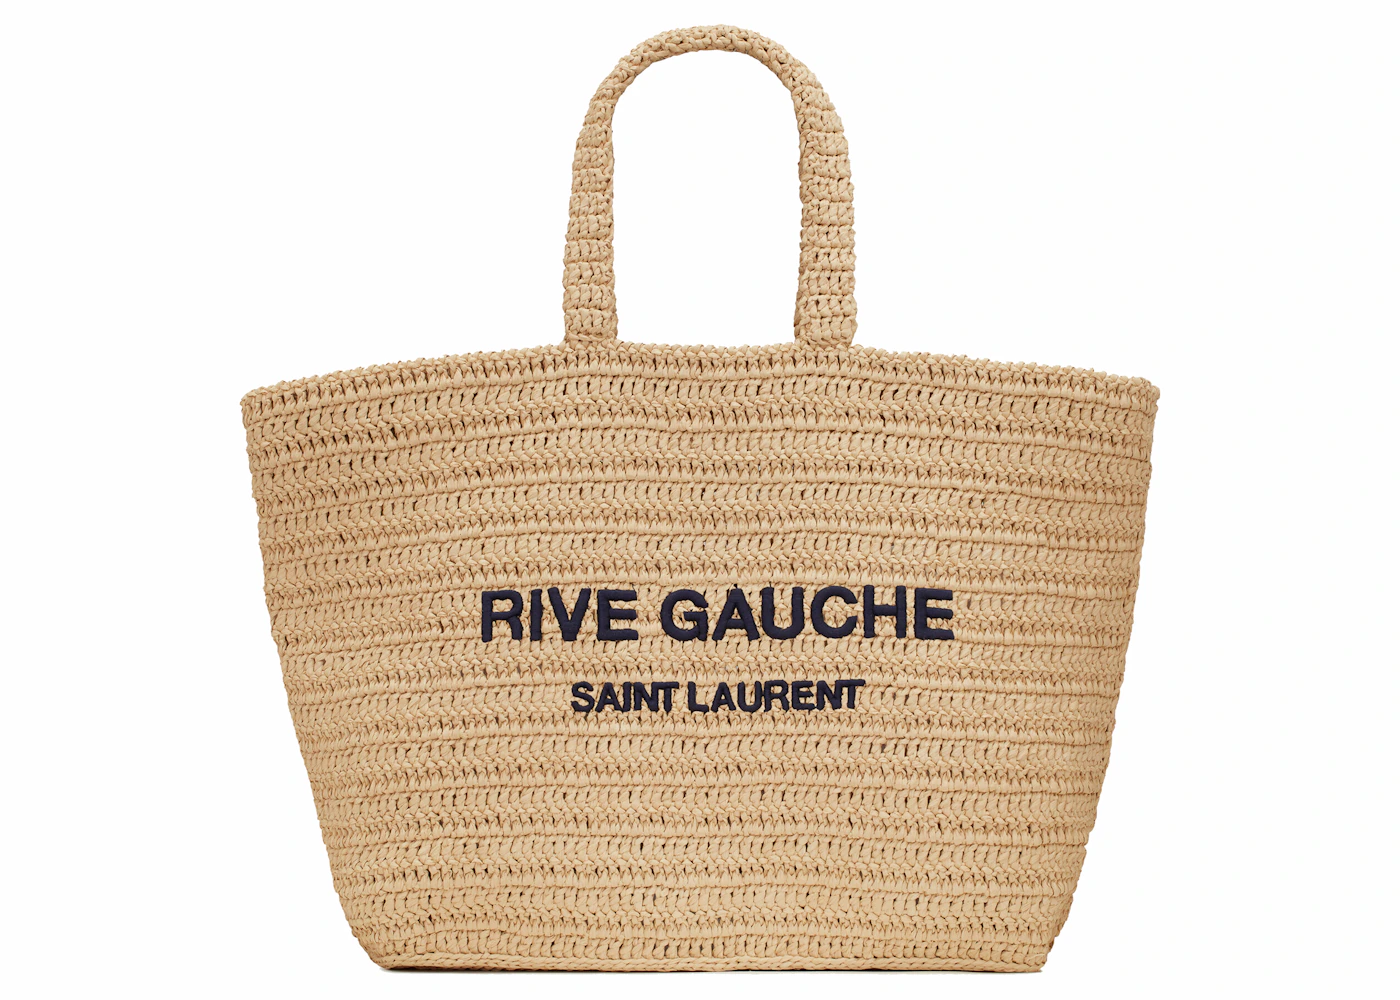 SAINT LAURENT Rive Gauche small leather-trimmed printed canvas tote